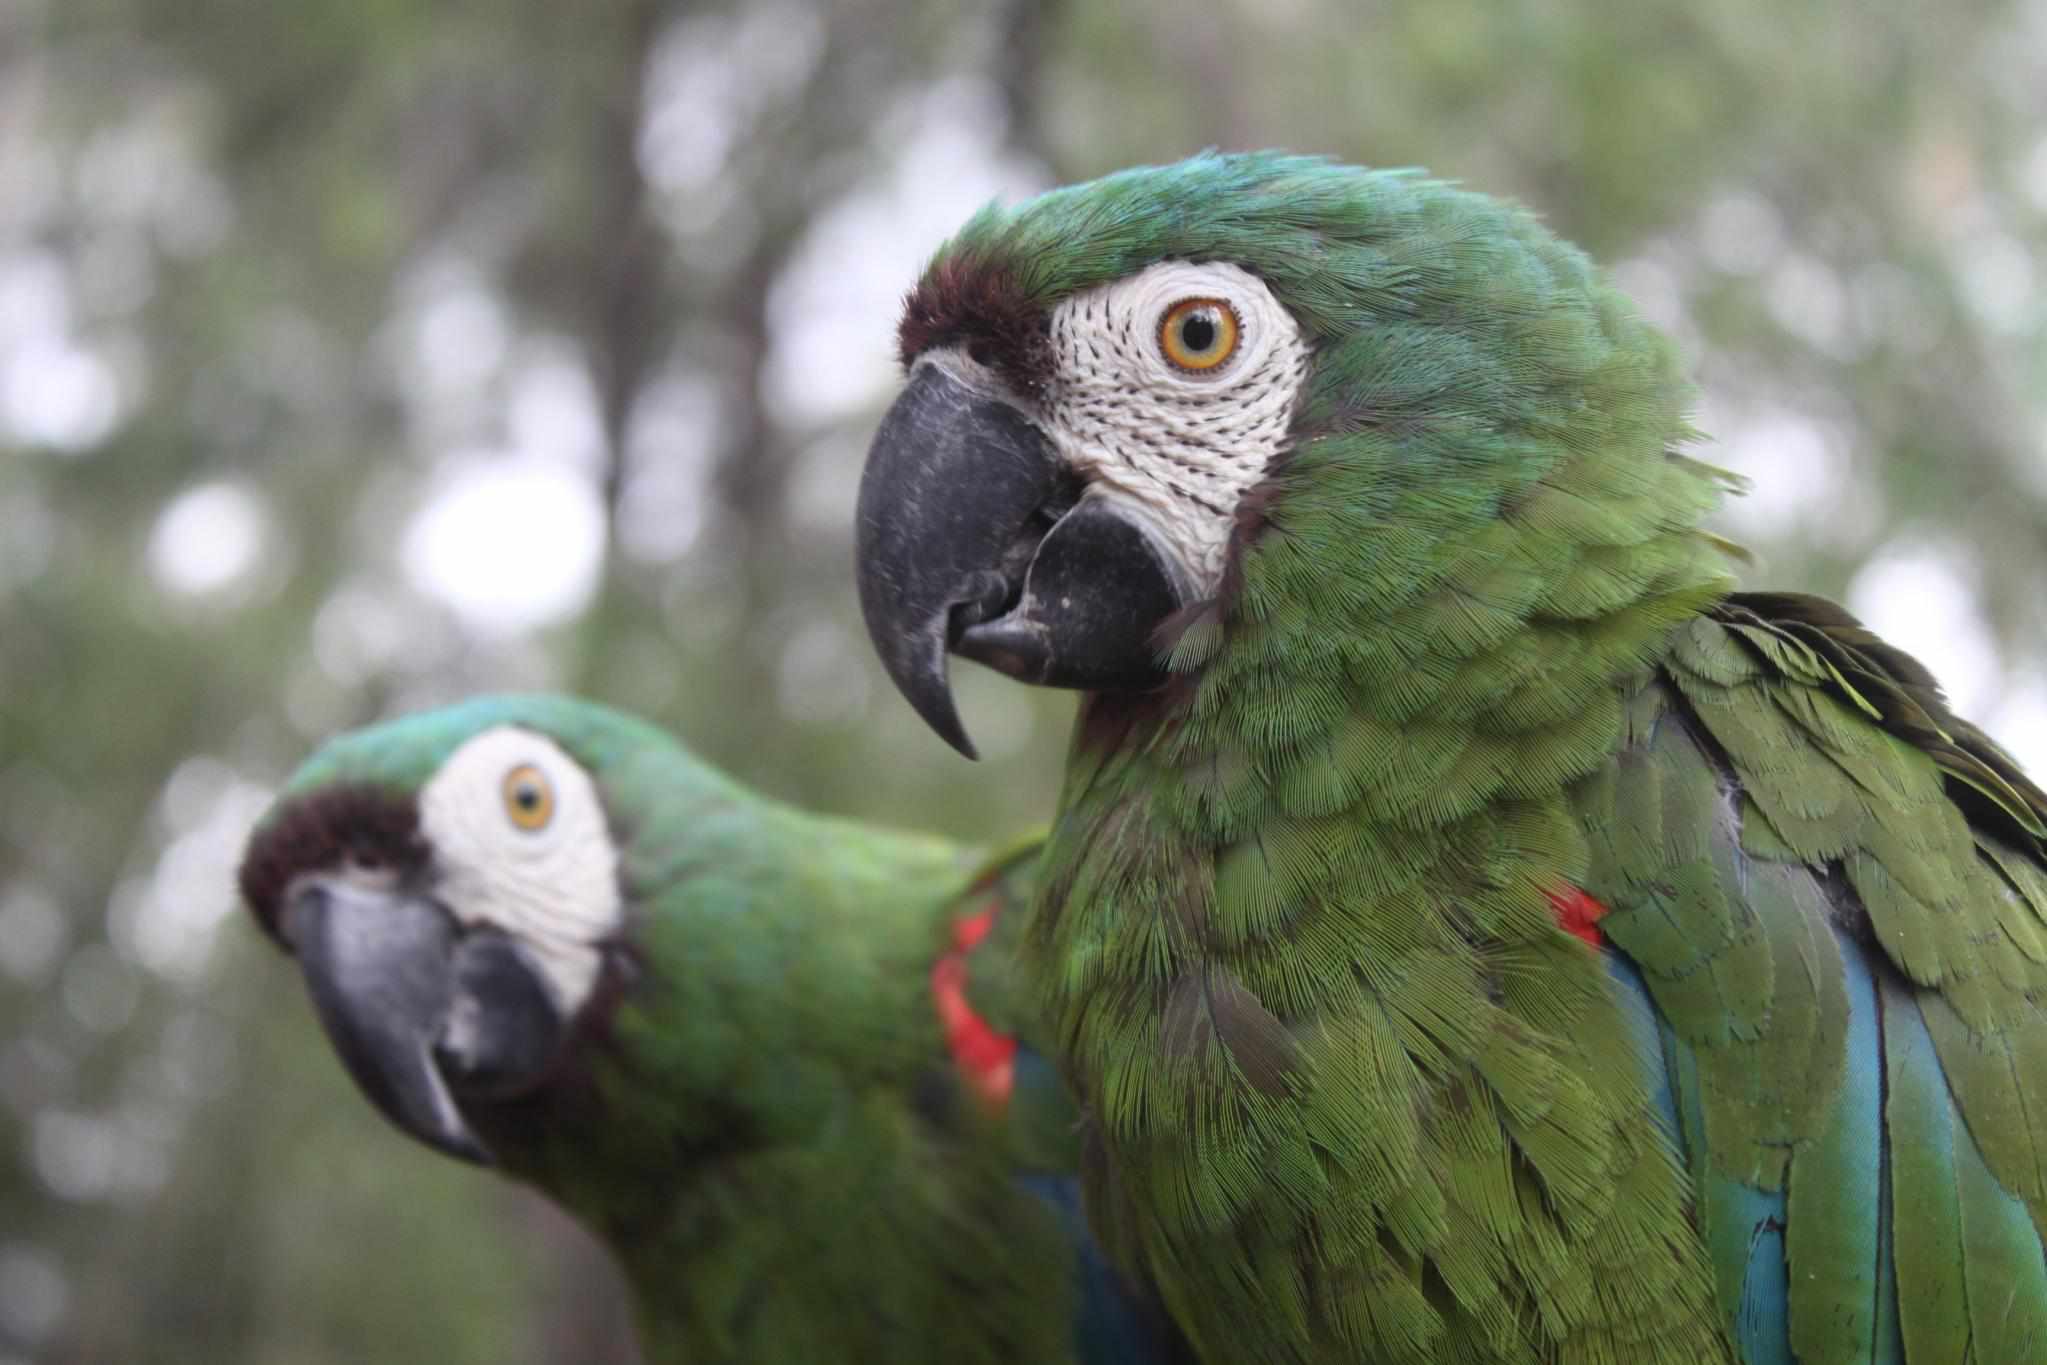 Two Severe macaws staring at the camera.